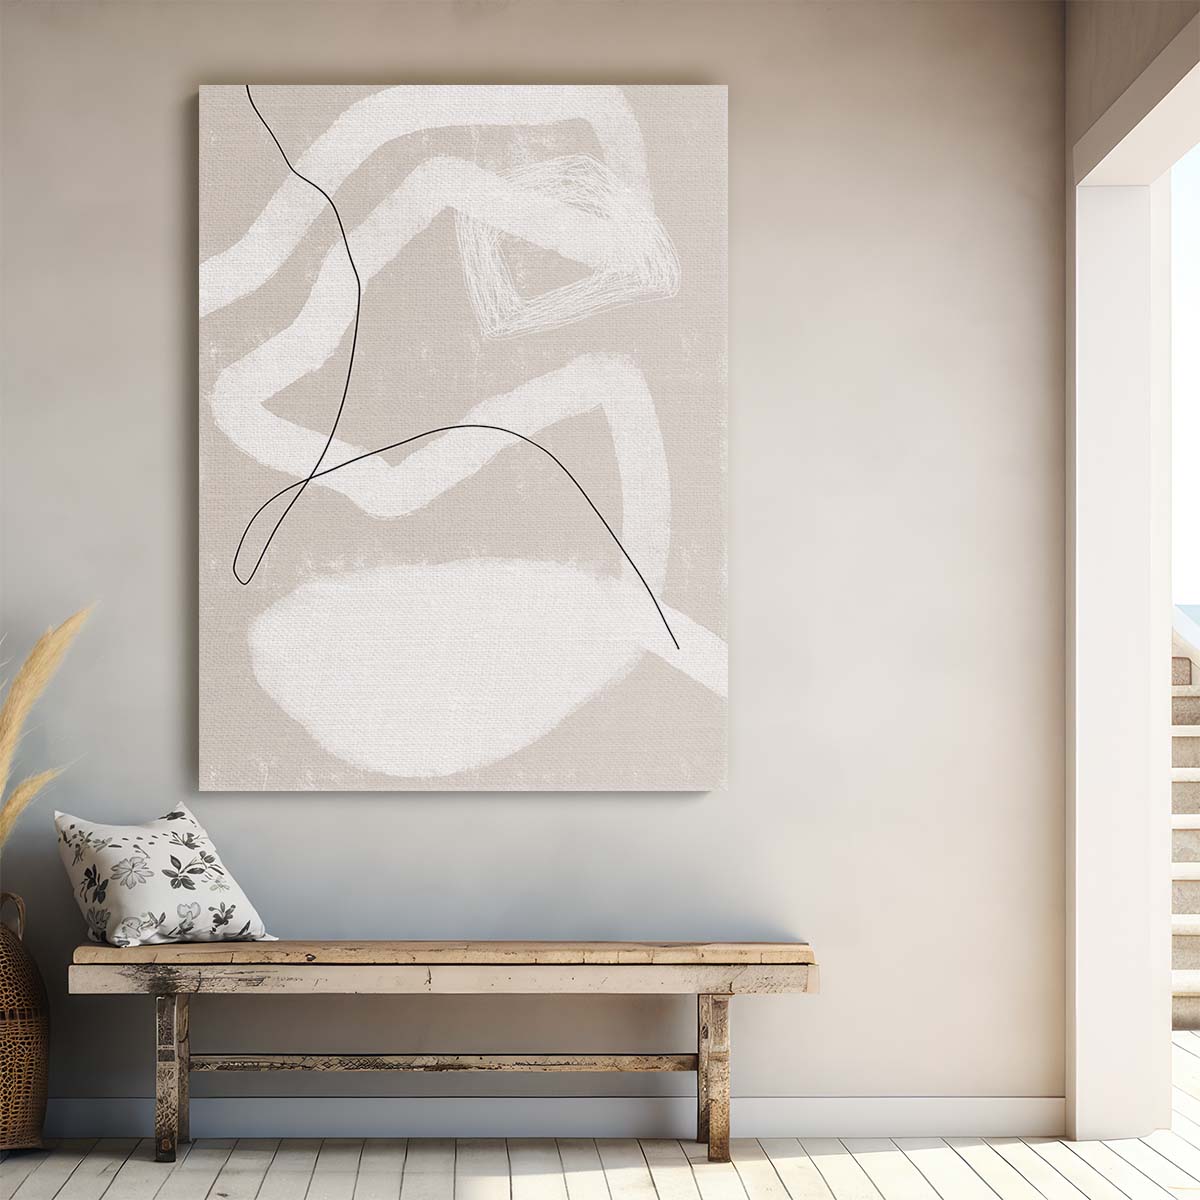 Abstract Beige Line Illustration Art by Uplusmestudio - Black & White Graphics by Luxuriance Designs, made in USA